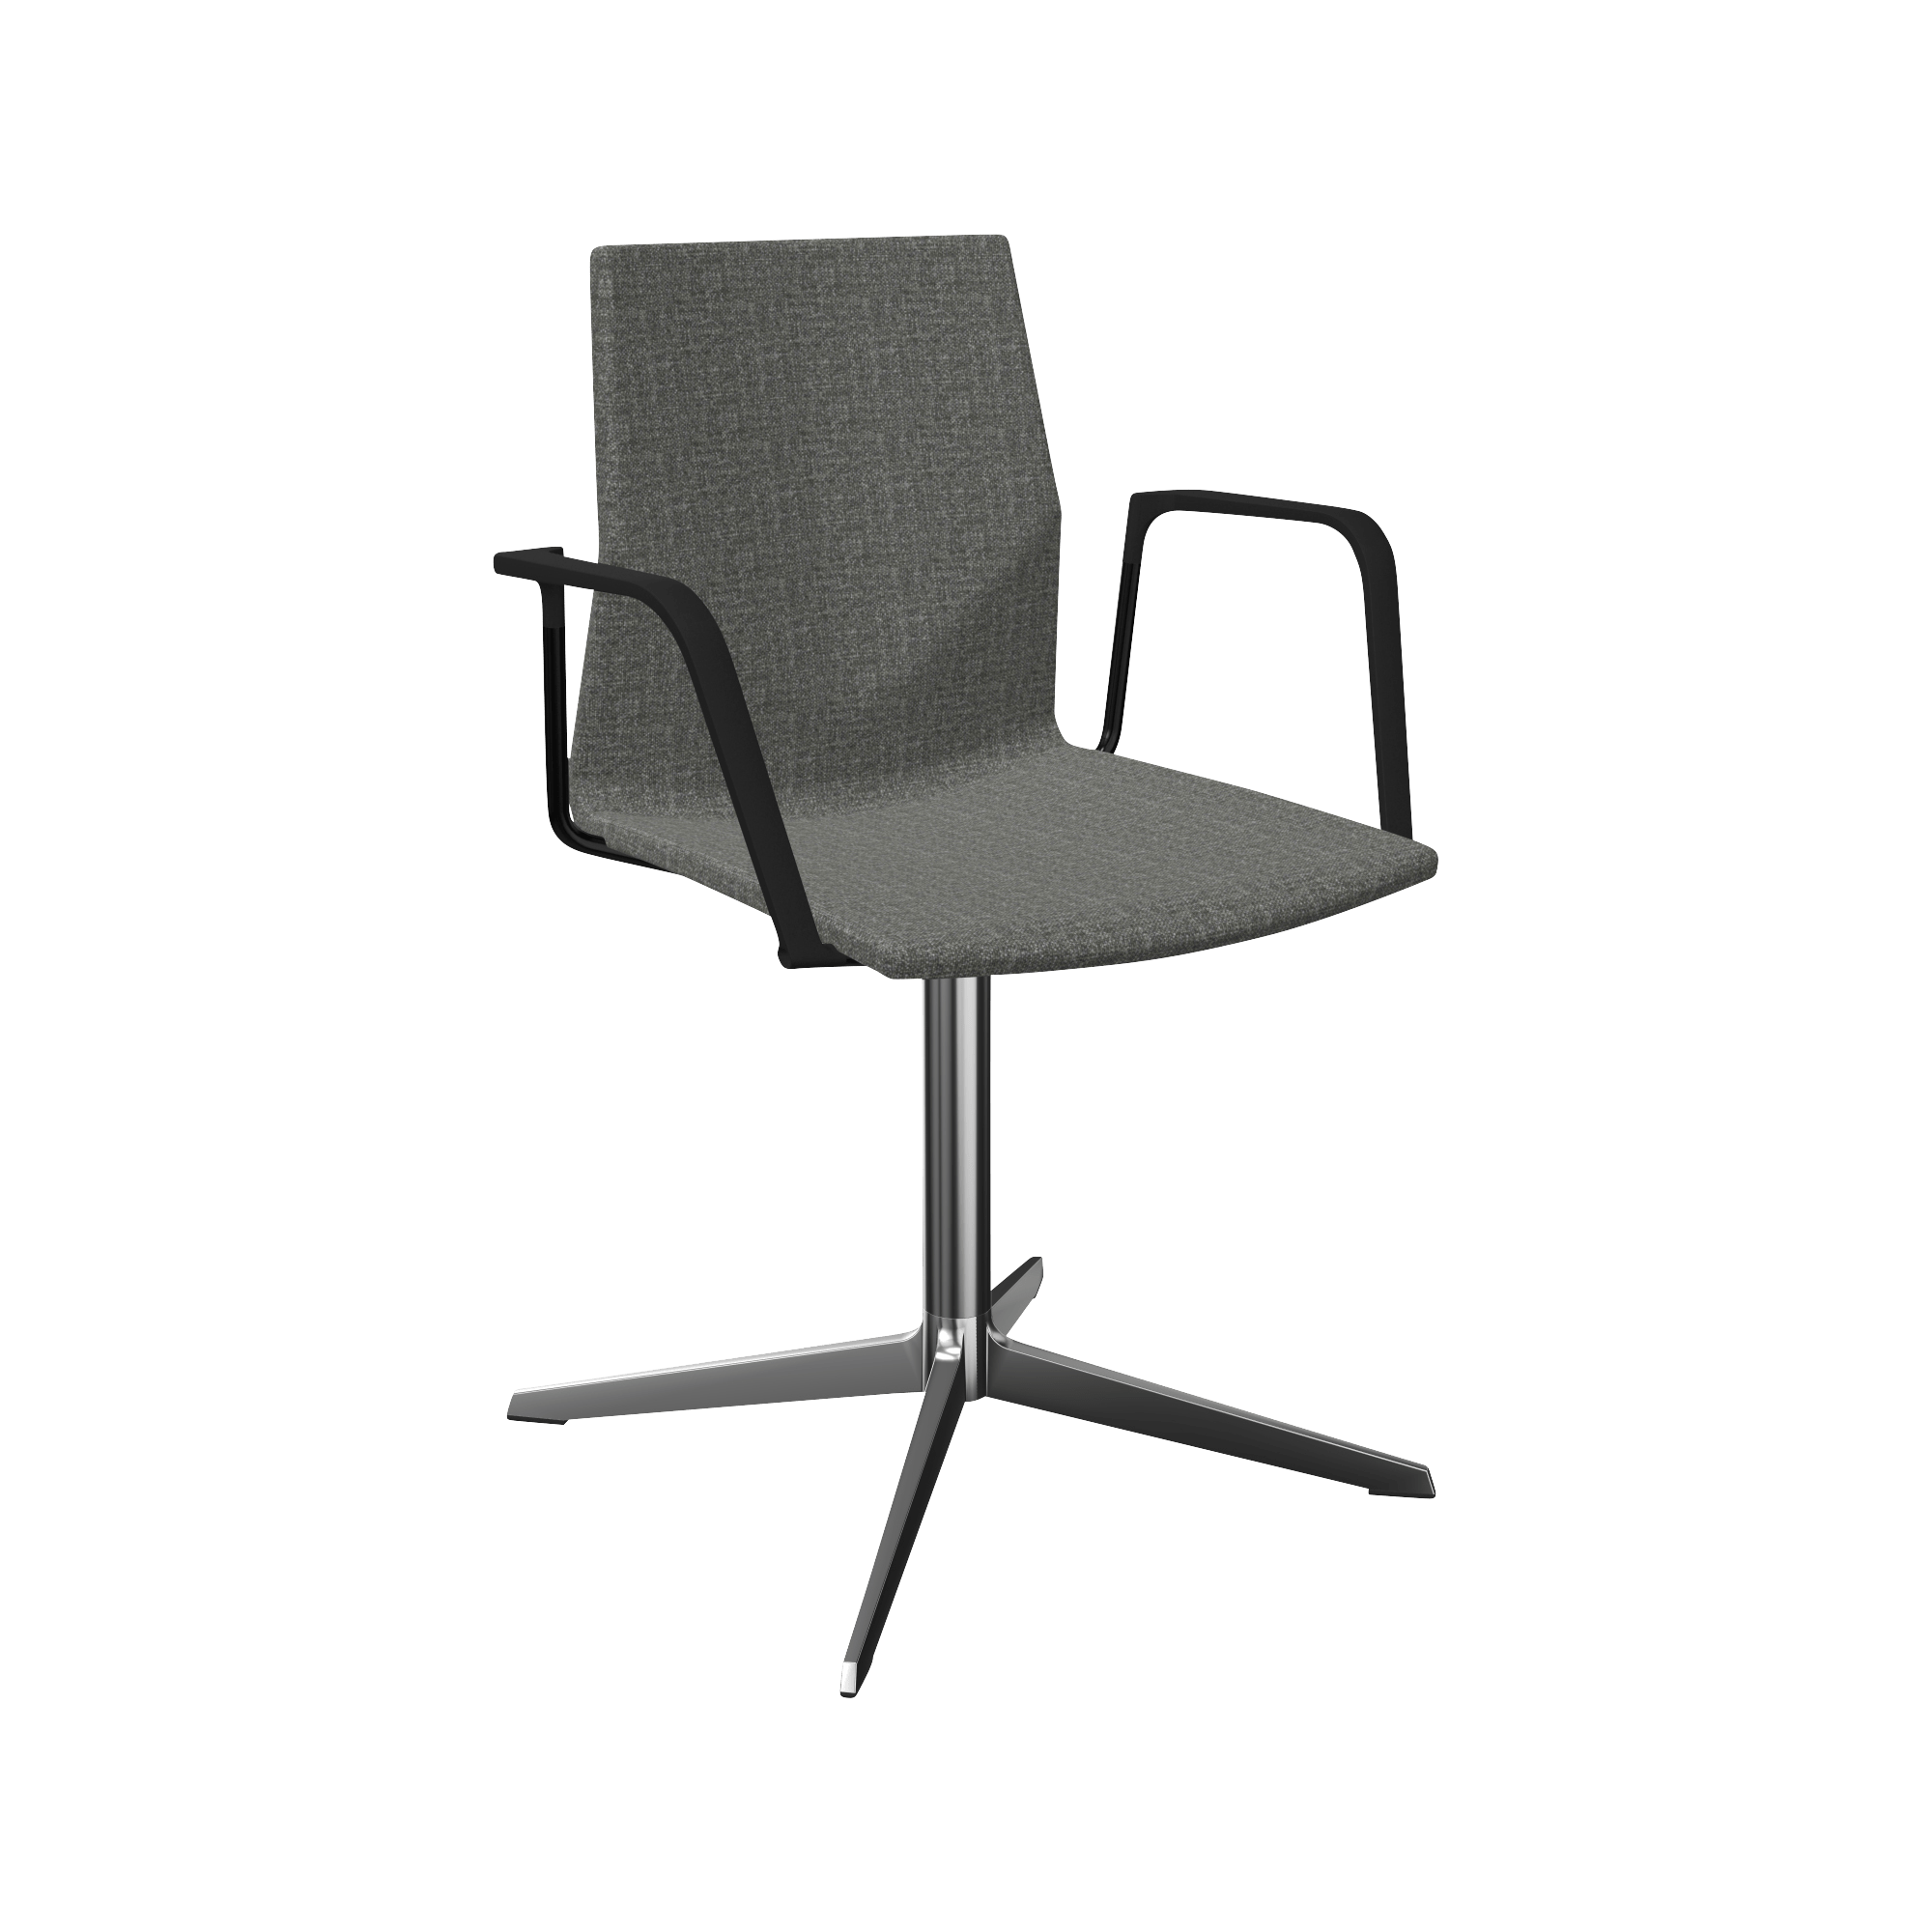 A grey office chair with black arm rests and a chrome pedestal leg